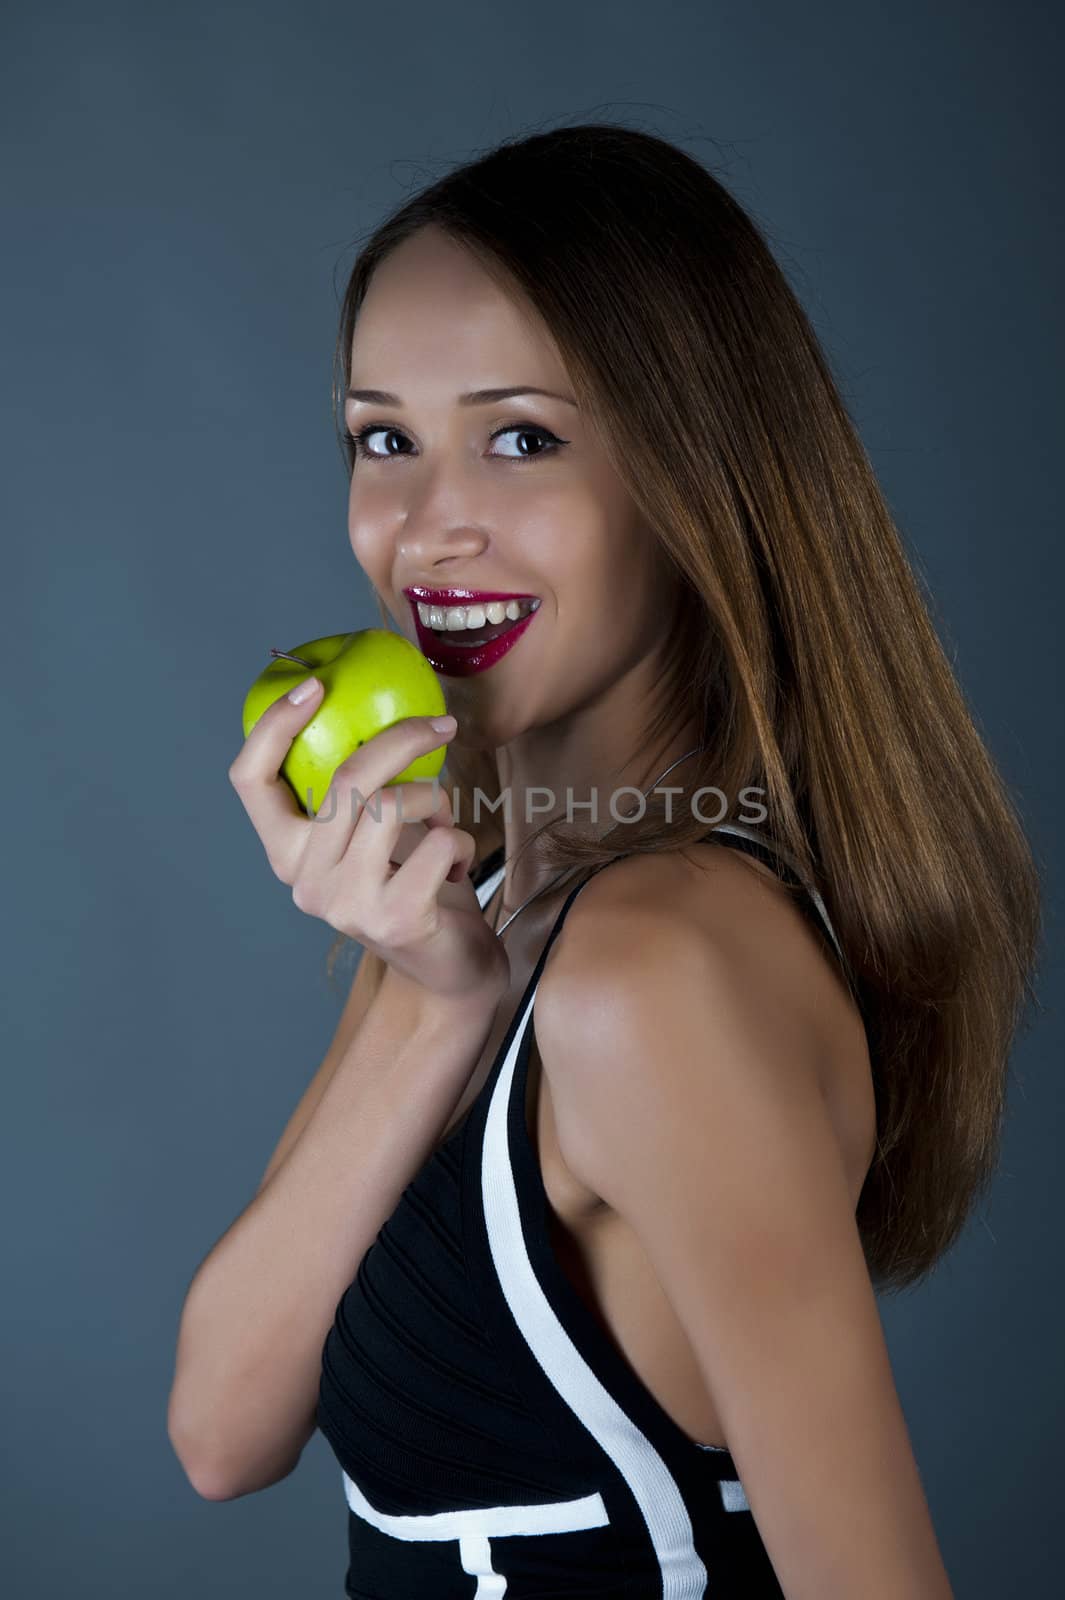 Attractive model with an apple in a hand